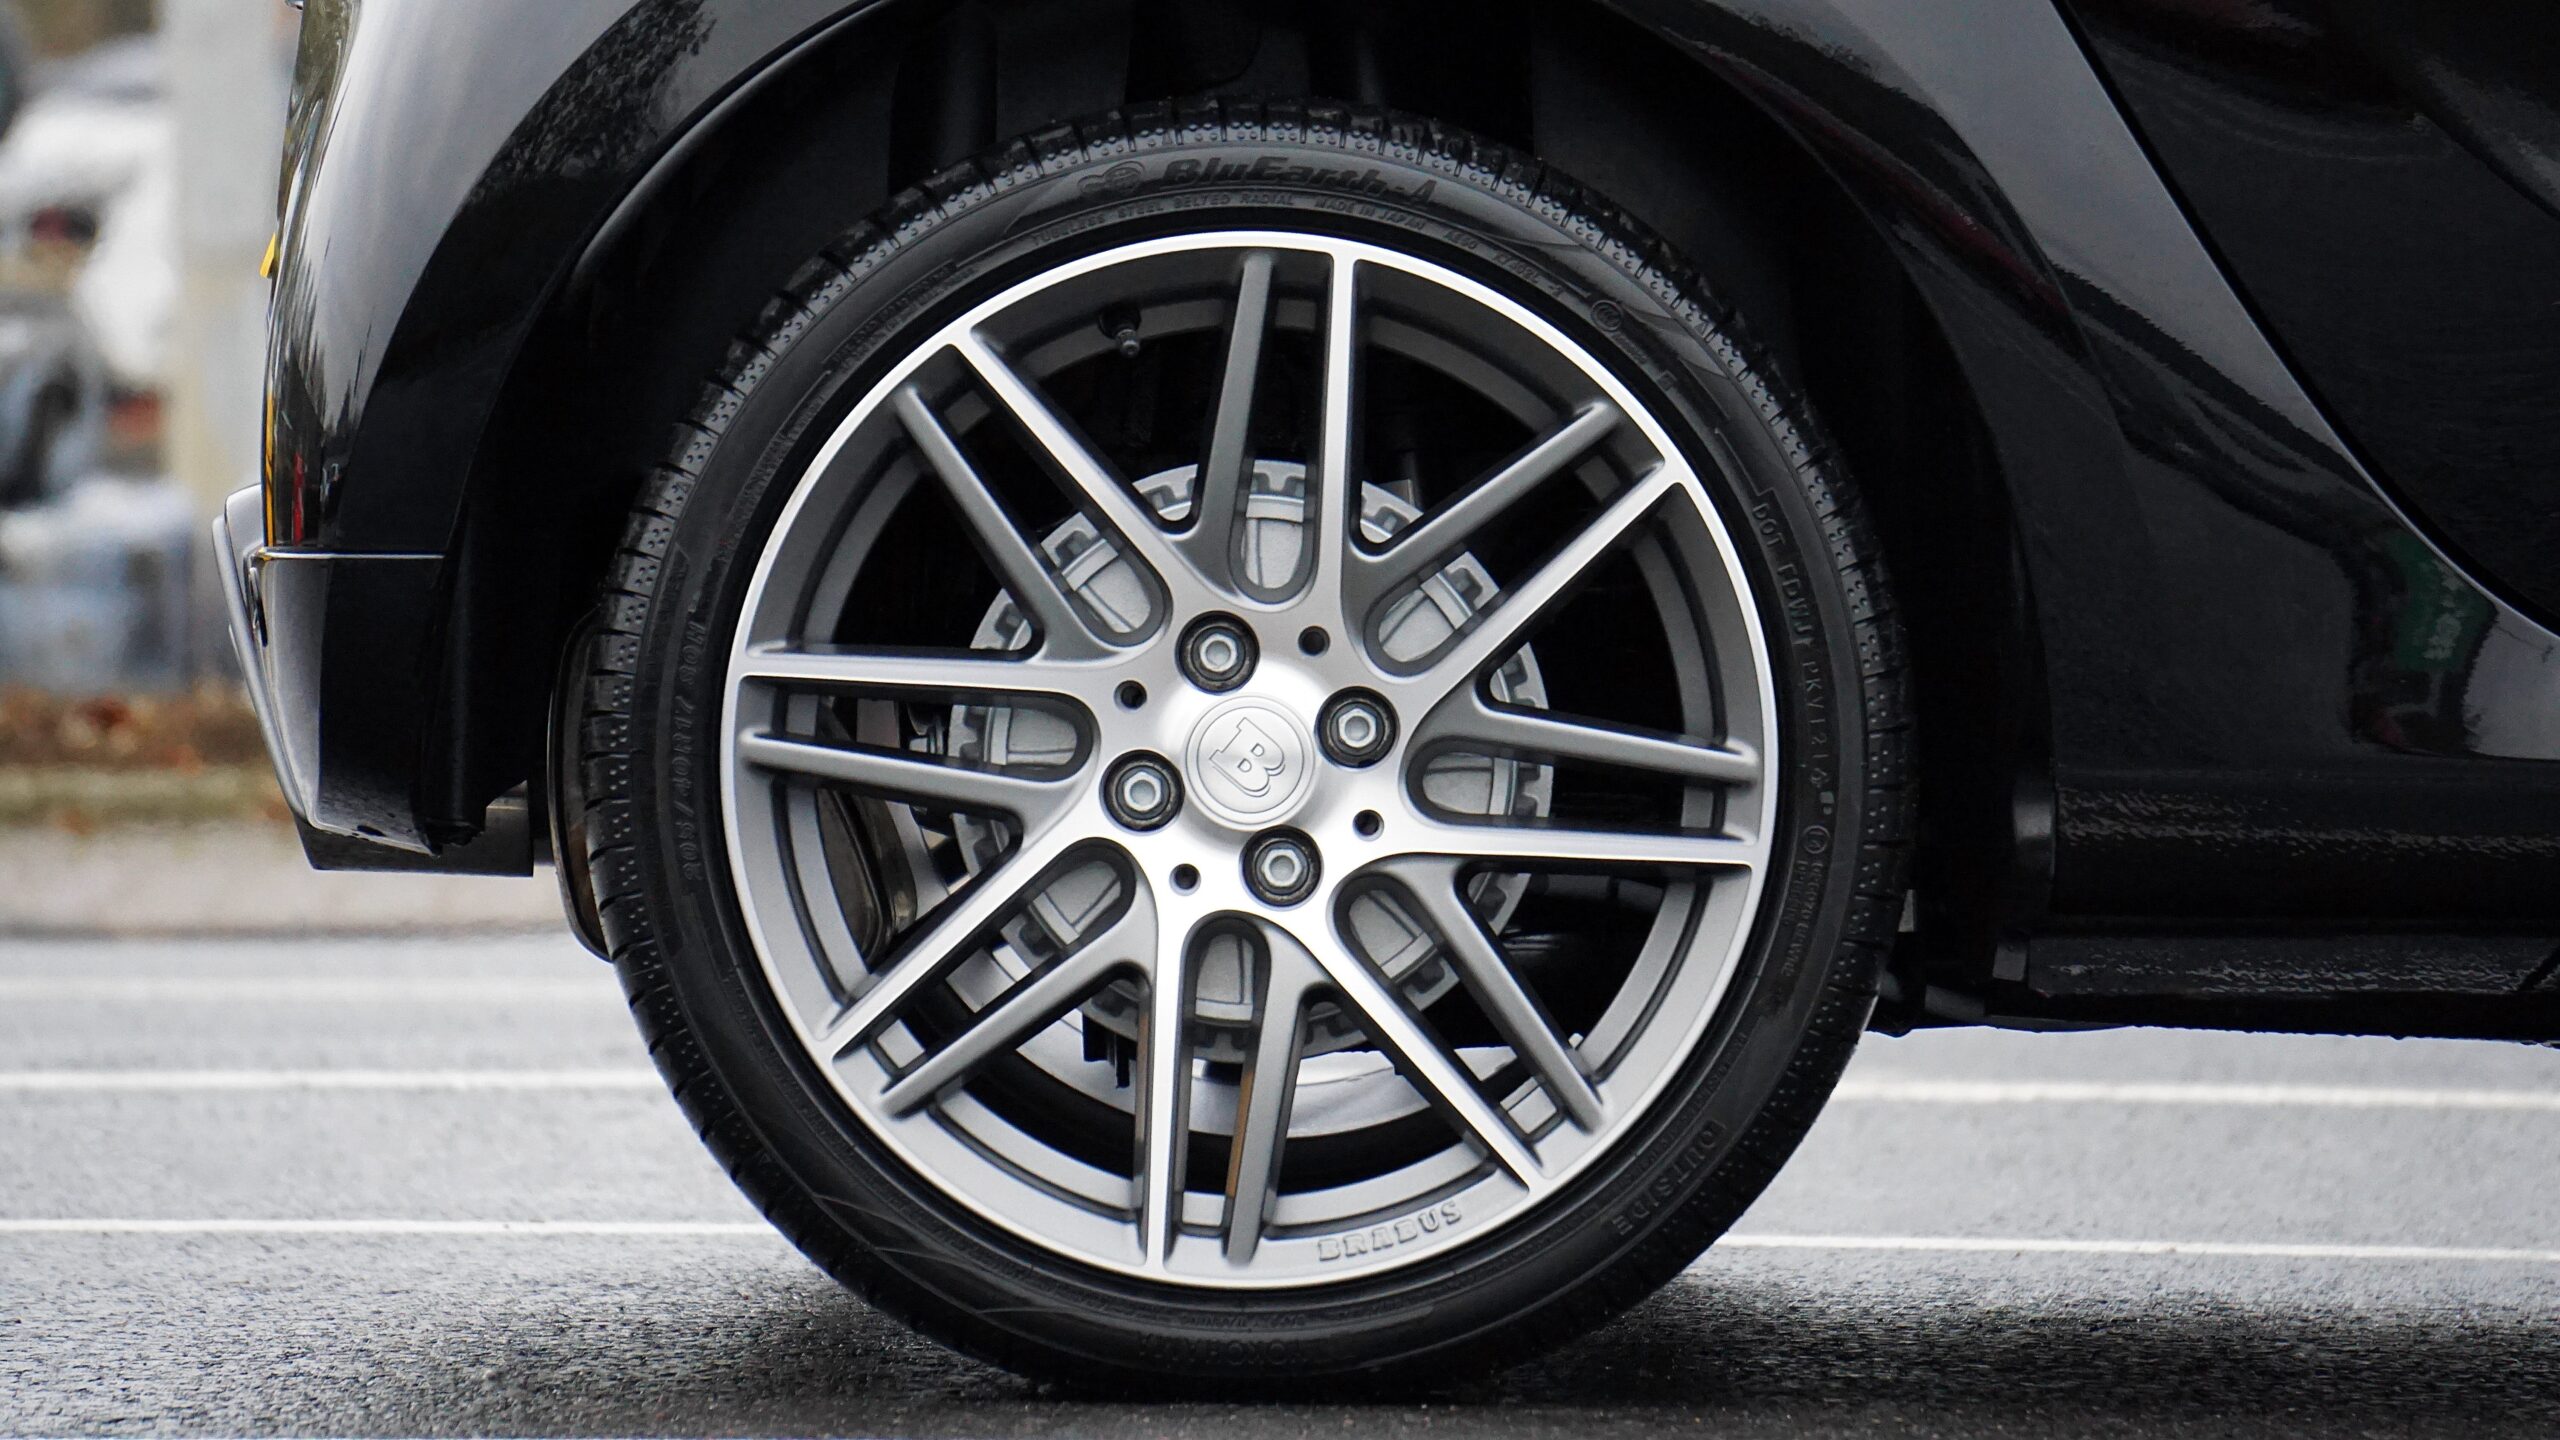 7 Tips For Buying Used Car Tires